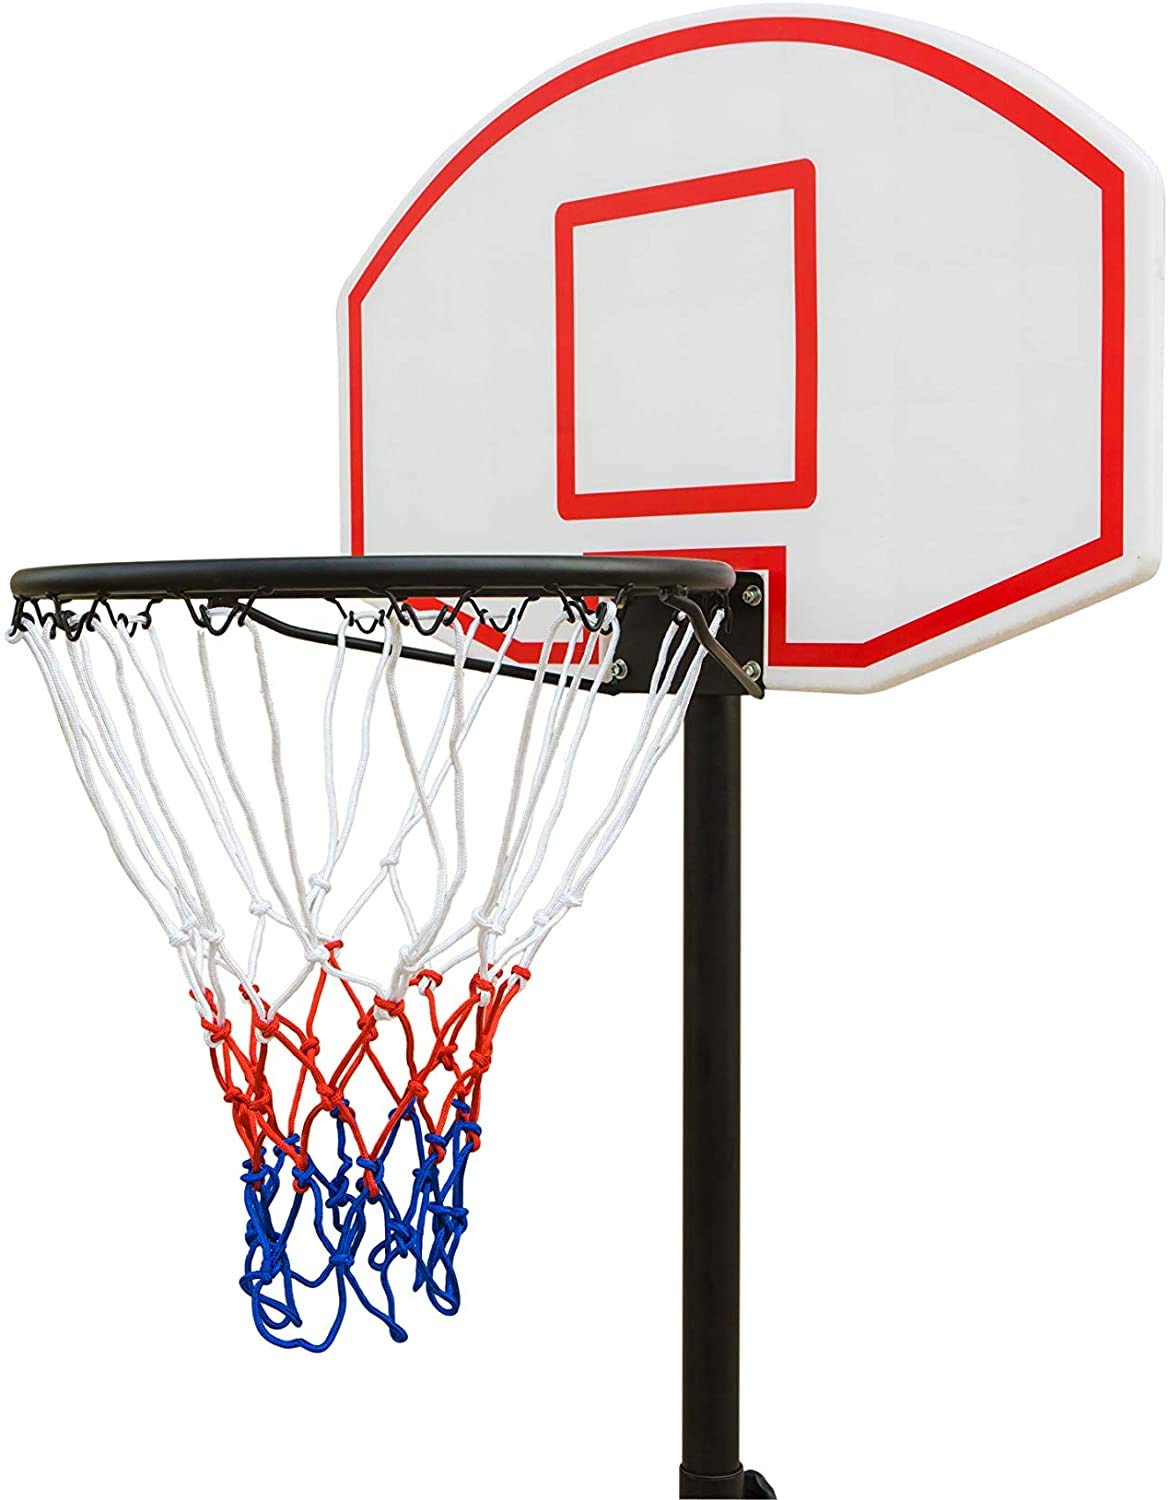 Basketball Hoop for Kids Portable Height-Adjustable [6.5FT - 8 FT] Sports Backboard System Stand w/Wheels